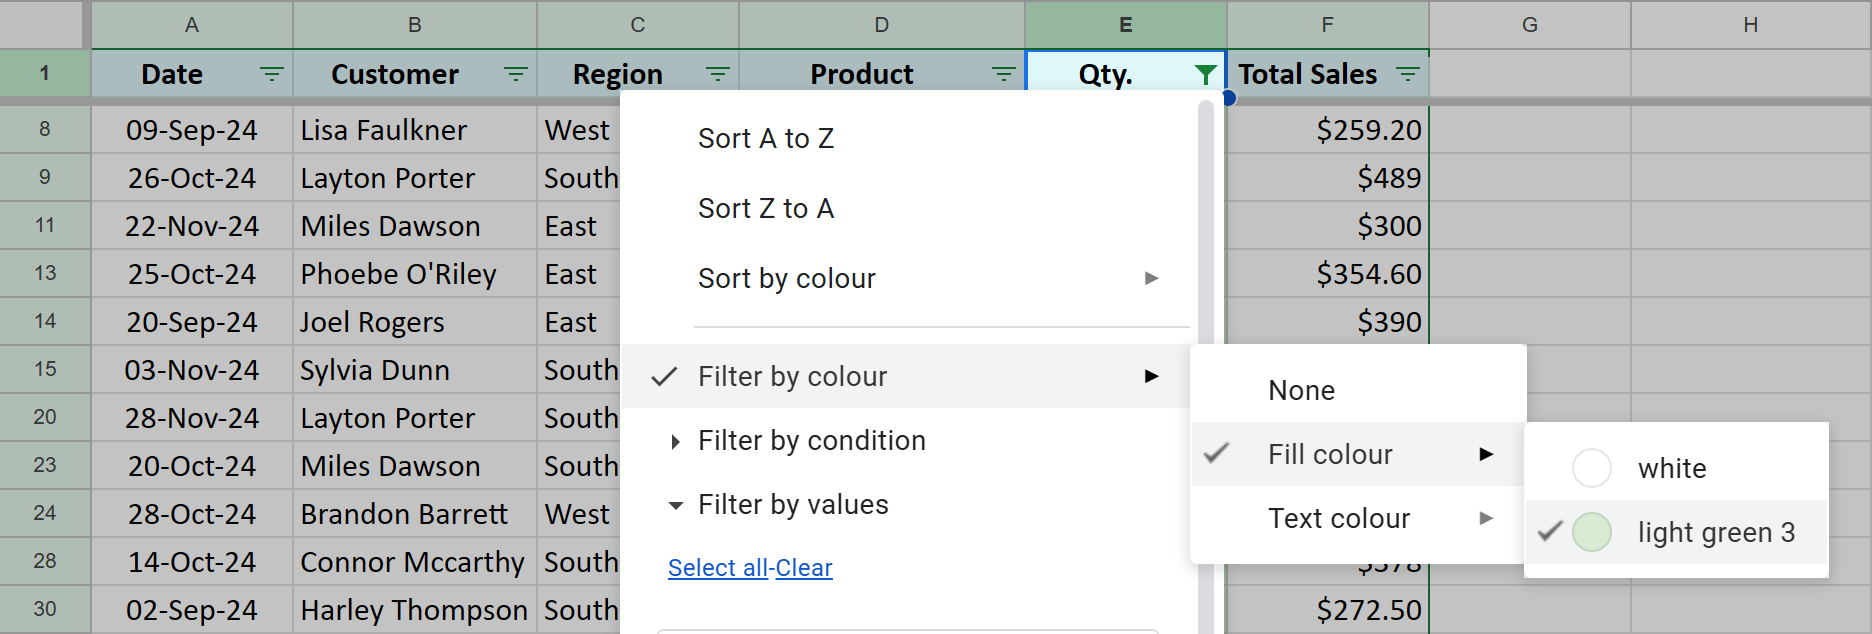 Filter Google Sheets by light green fill color.